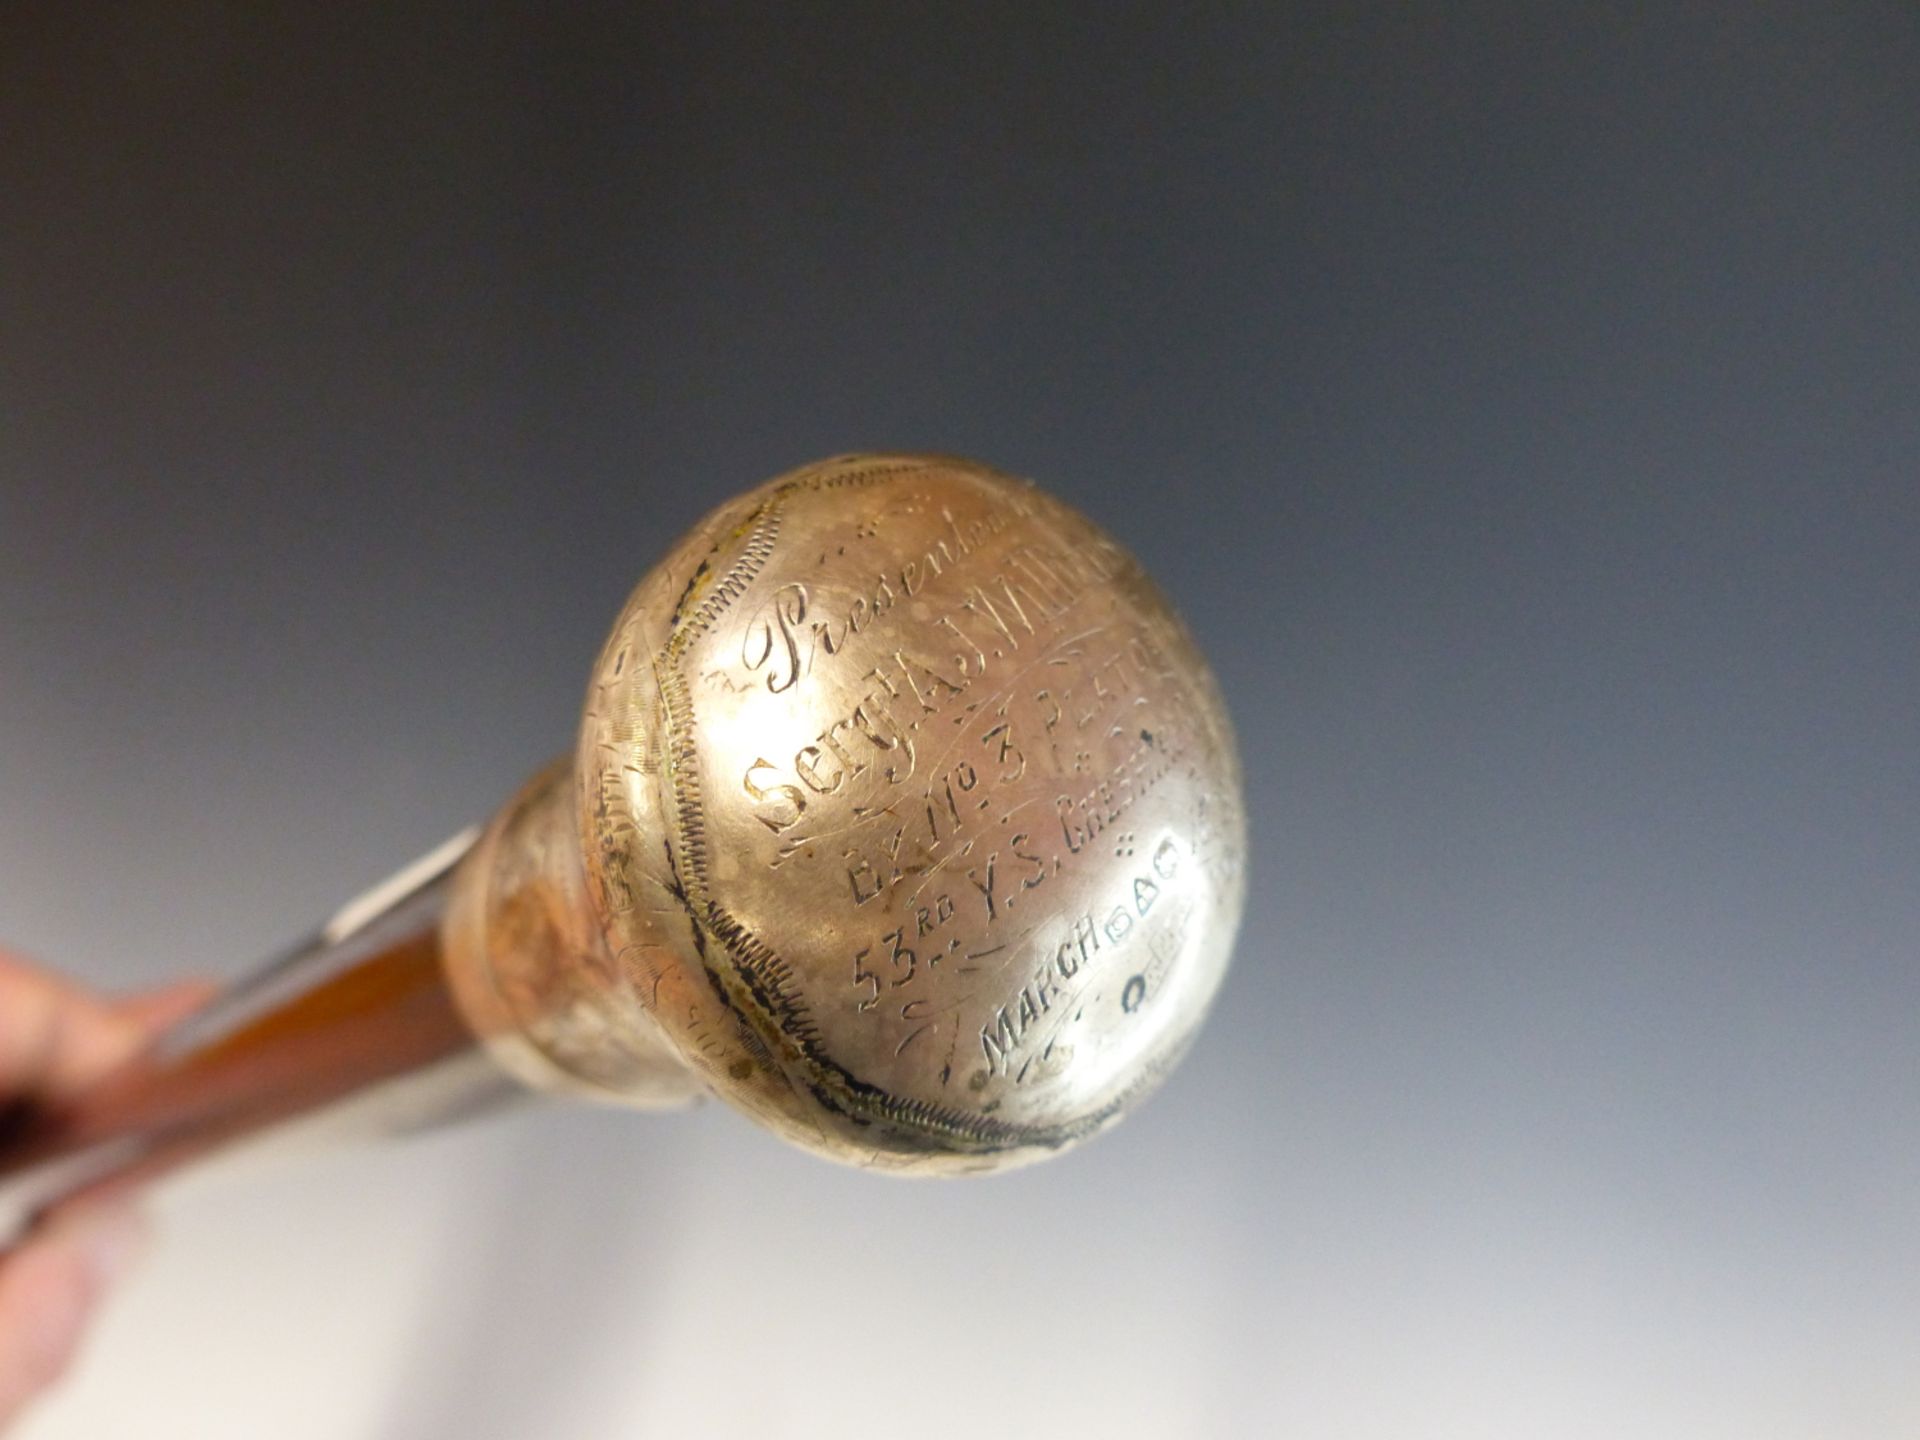 A SILVER MOUNTED BLACK LACQUER WALKING CANE WITH INSCRIPTION, PRESENTED TO SERGEANT AJ WILLIAMS, - Image 2 of 5